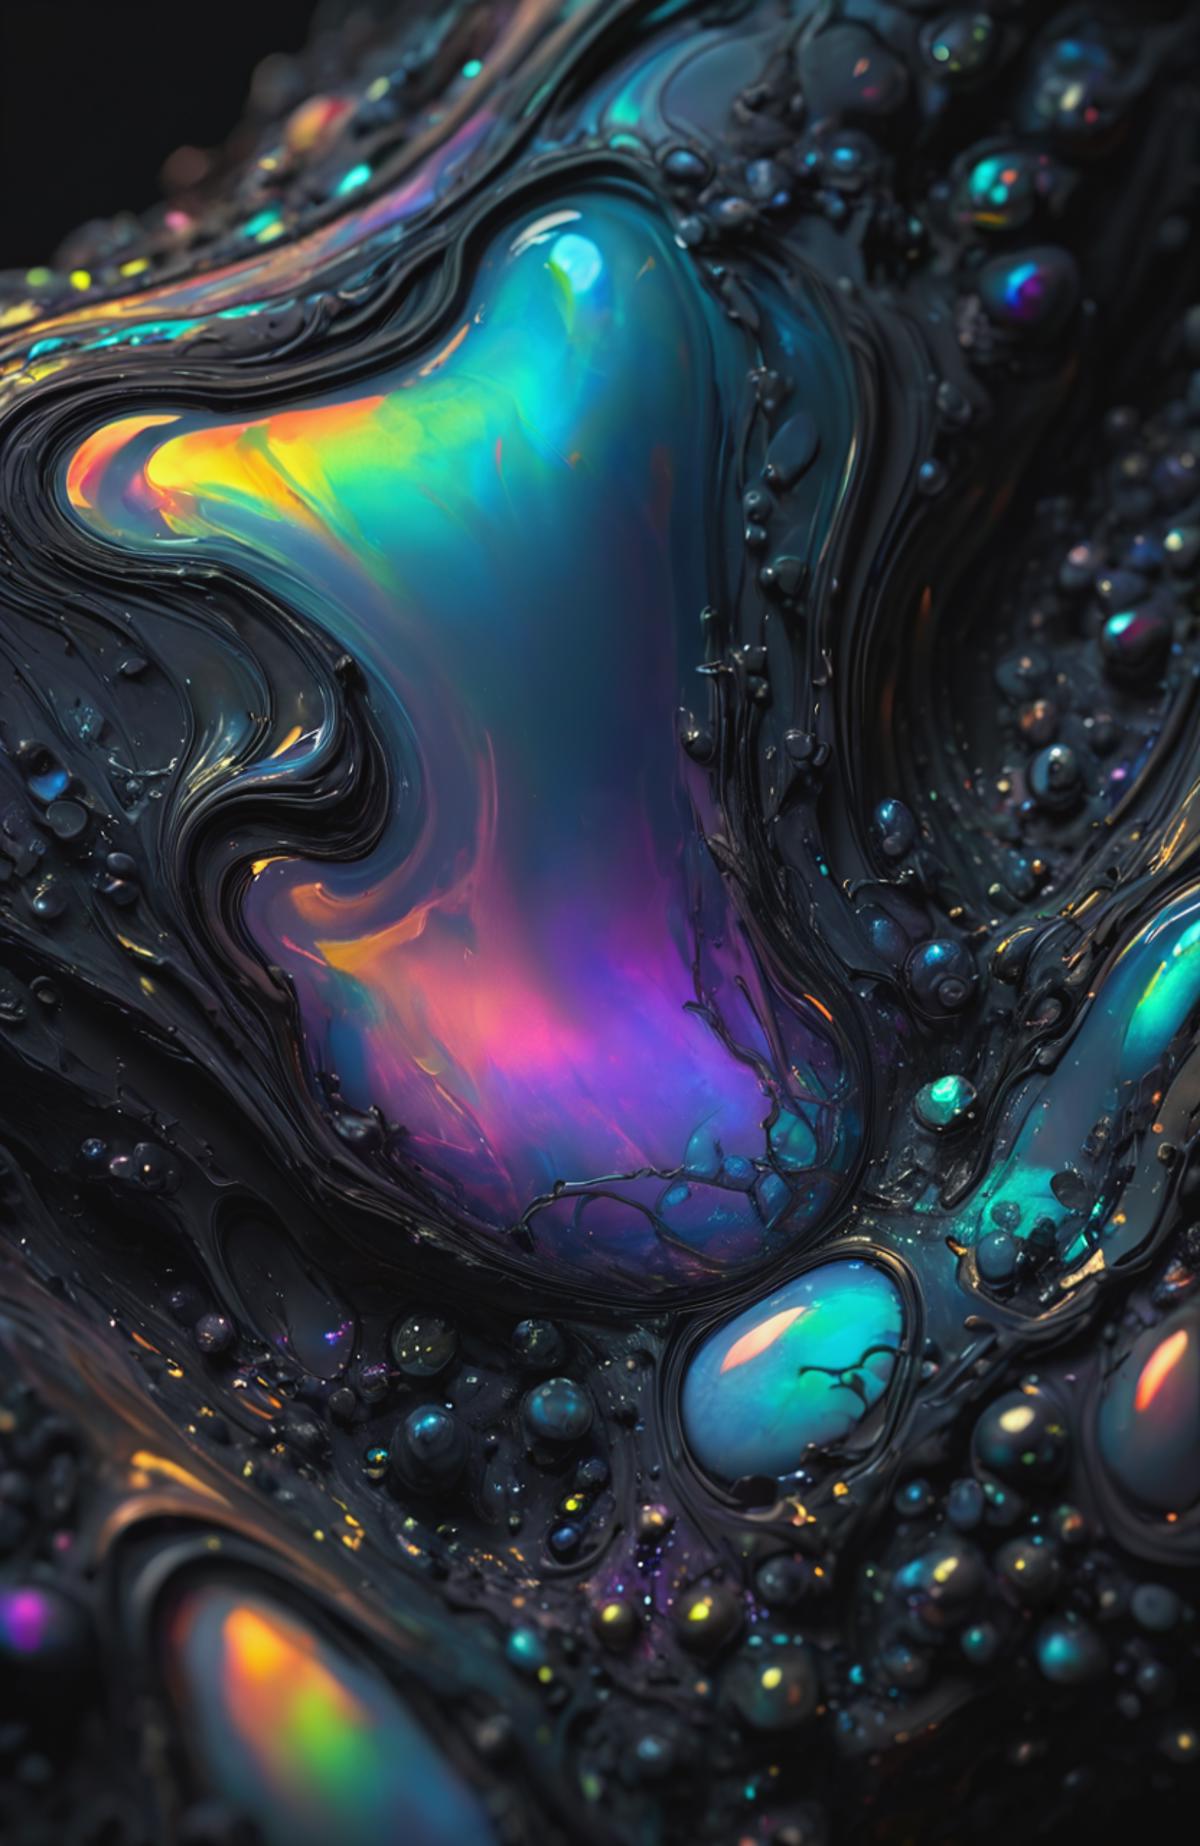 Vibrant and colorful abstract artwork with swirls and bubbles.